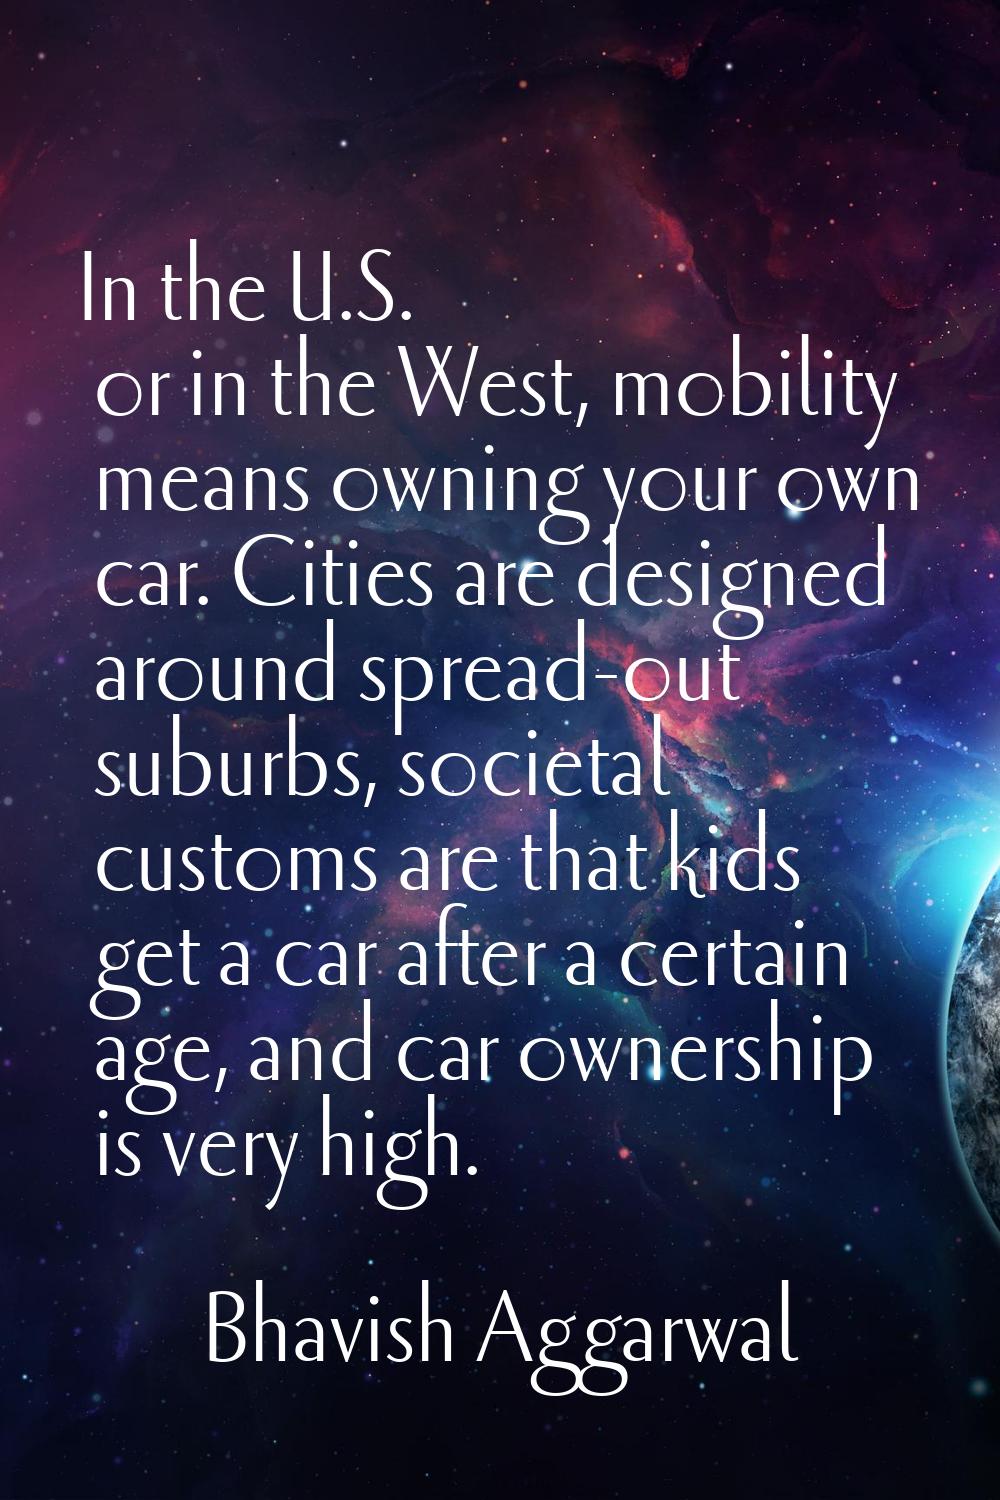 In the U.S. or in the West, mobility means owning your own car. Cities are designed around spread-o